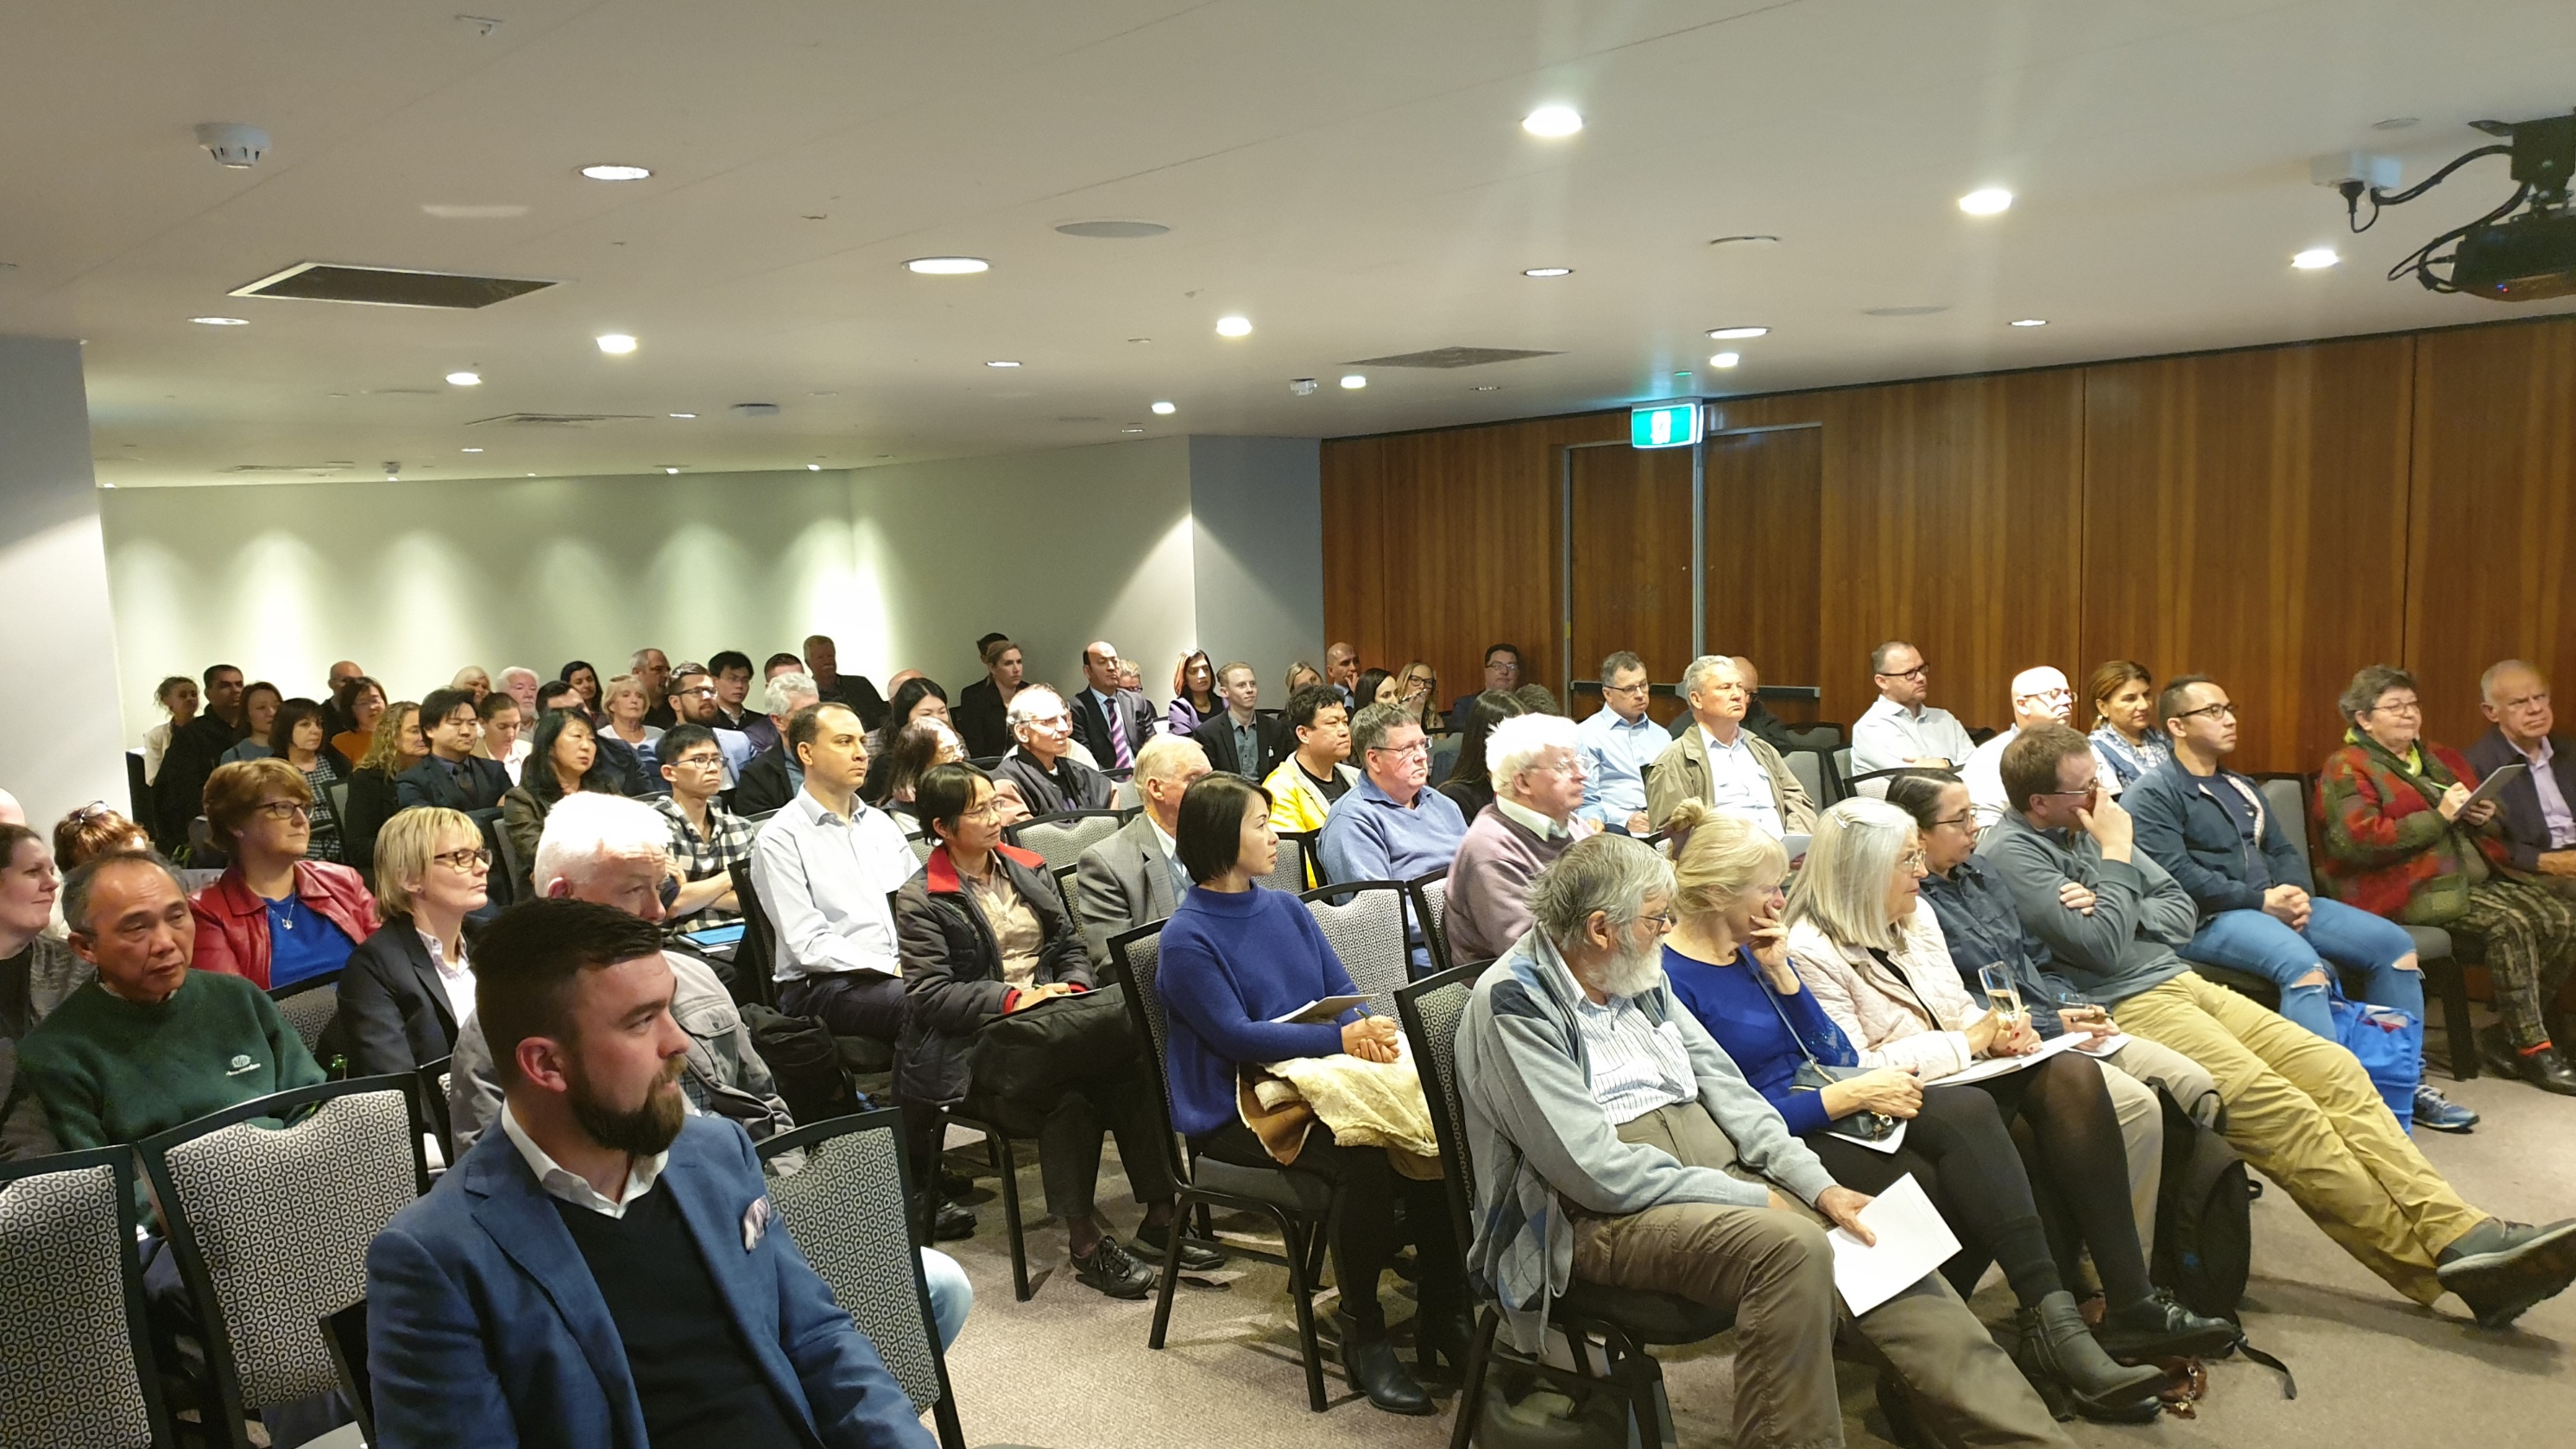 Attendees at How to Deal with Building Defects in Sydney by Strata Title Management